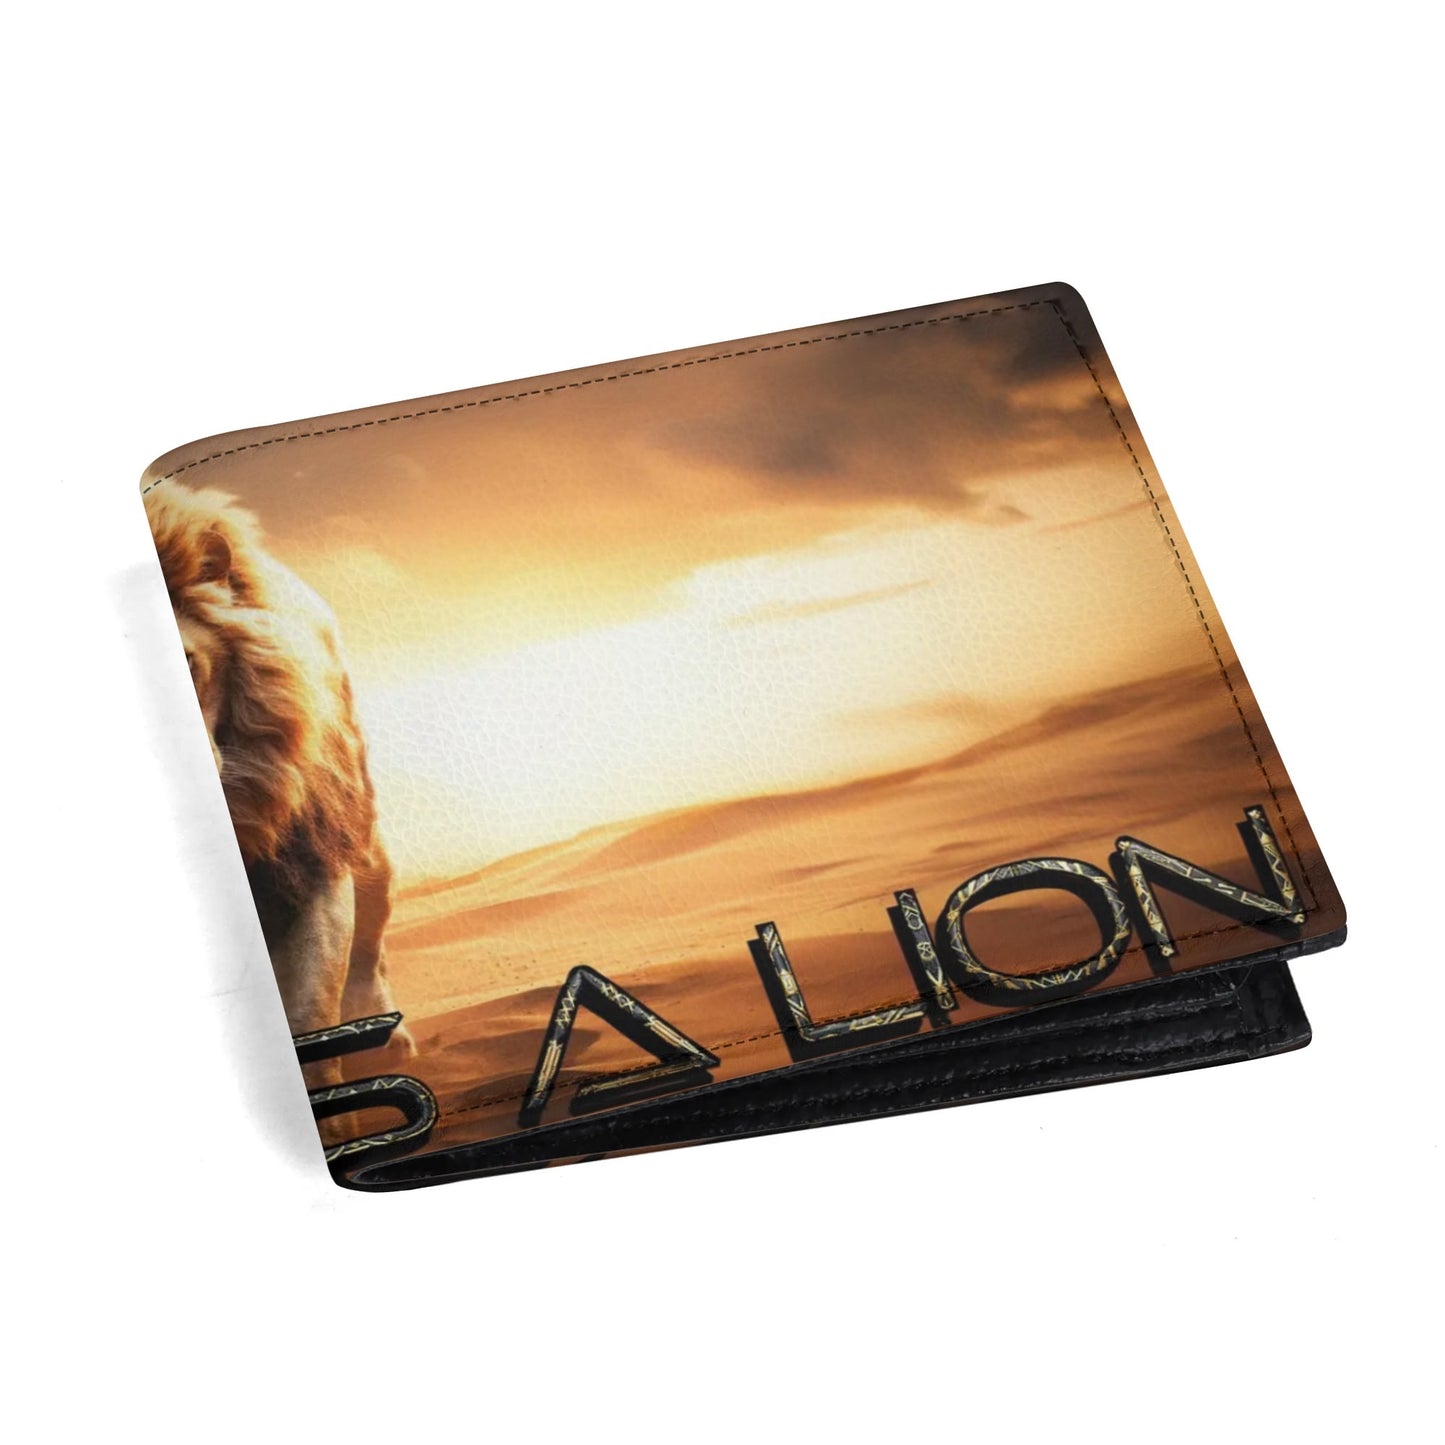 BOLD AS A LION- Mens Minimalist PU Leather Wallet Paper Folded Wallet, FREE SHIPPING